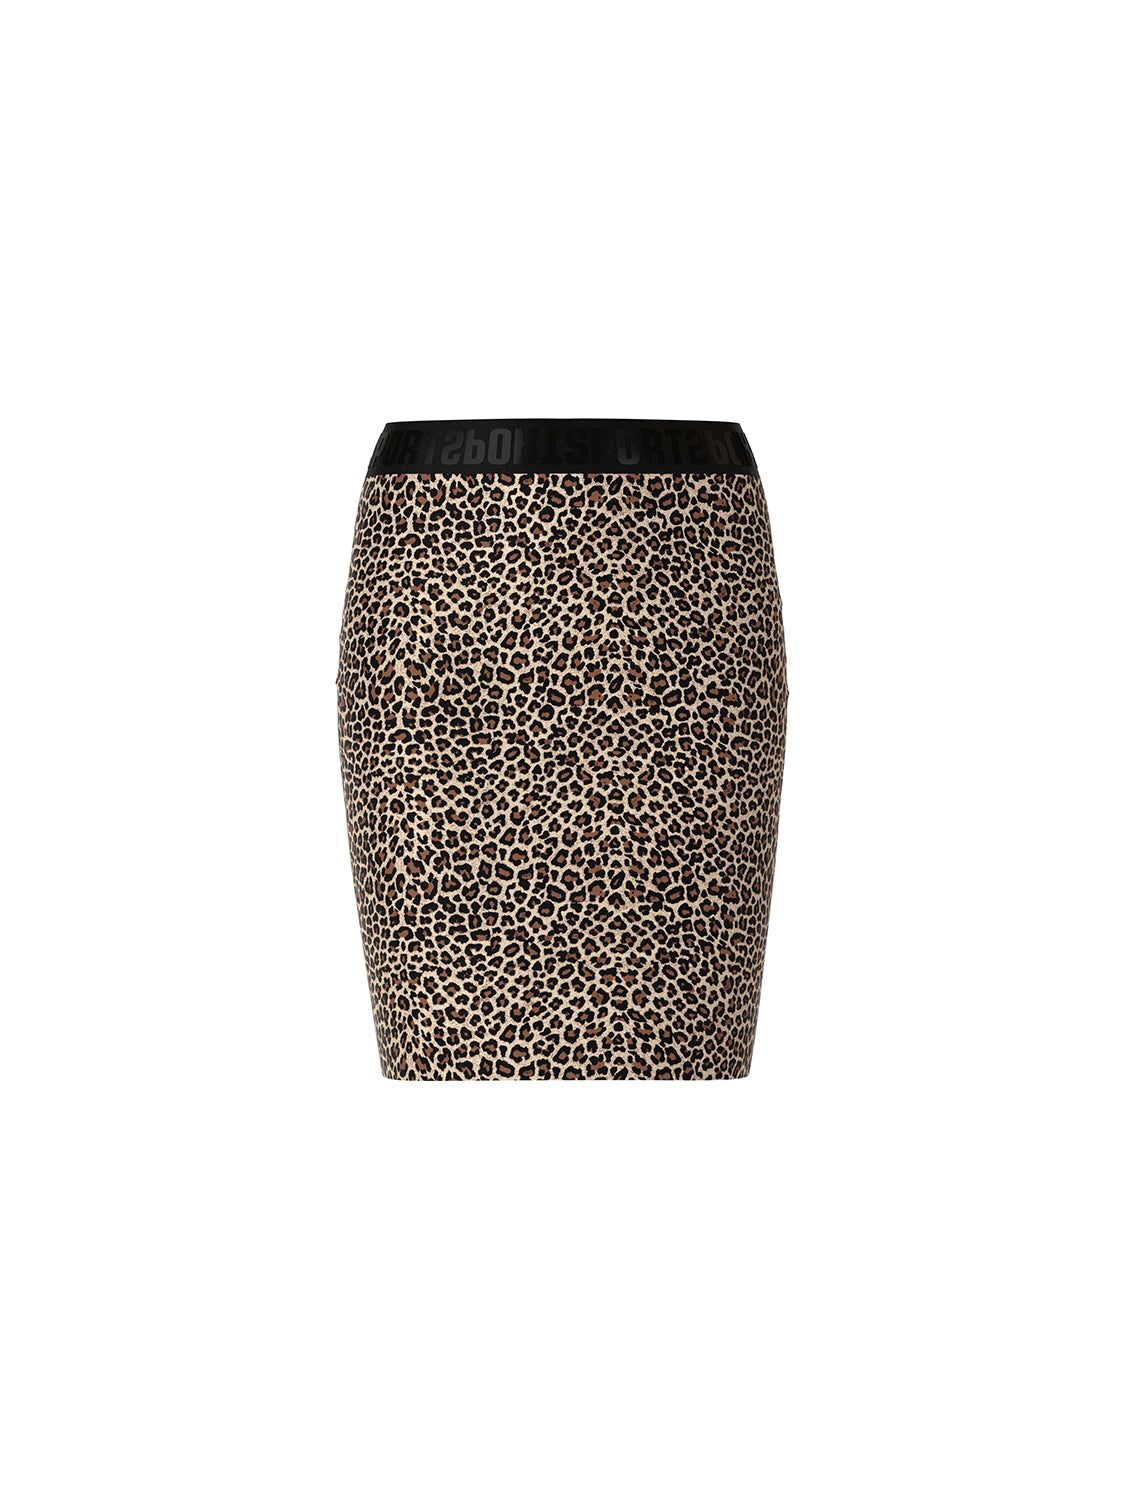 MarcCain Short Skirt with Leopard Print US7130J10